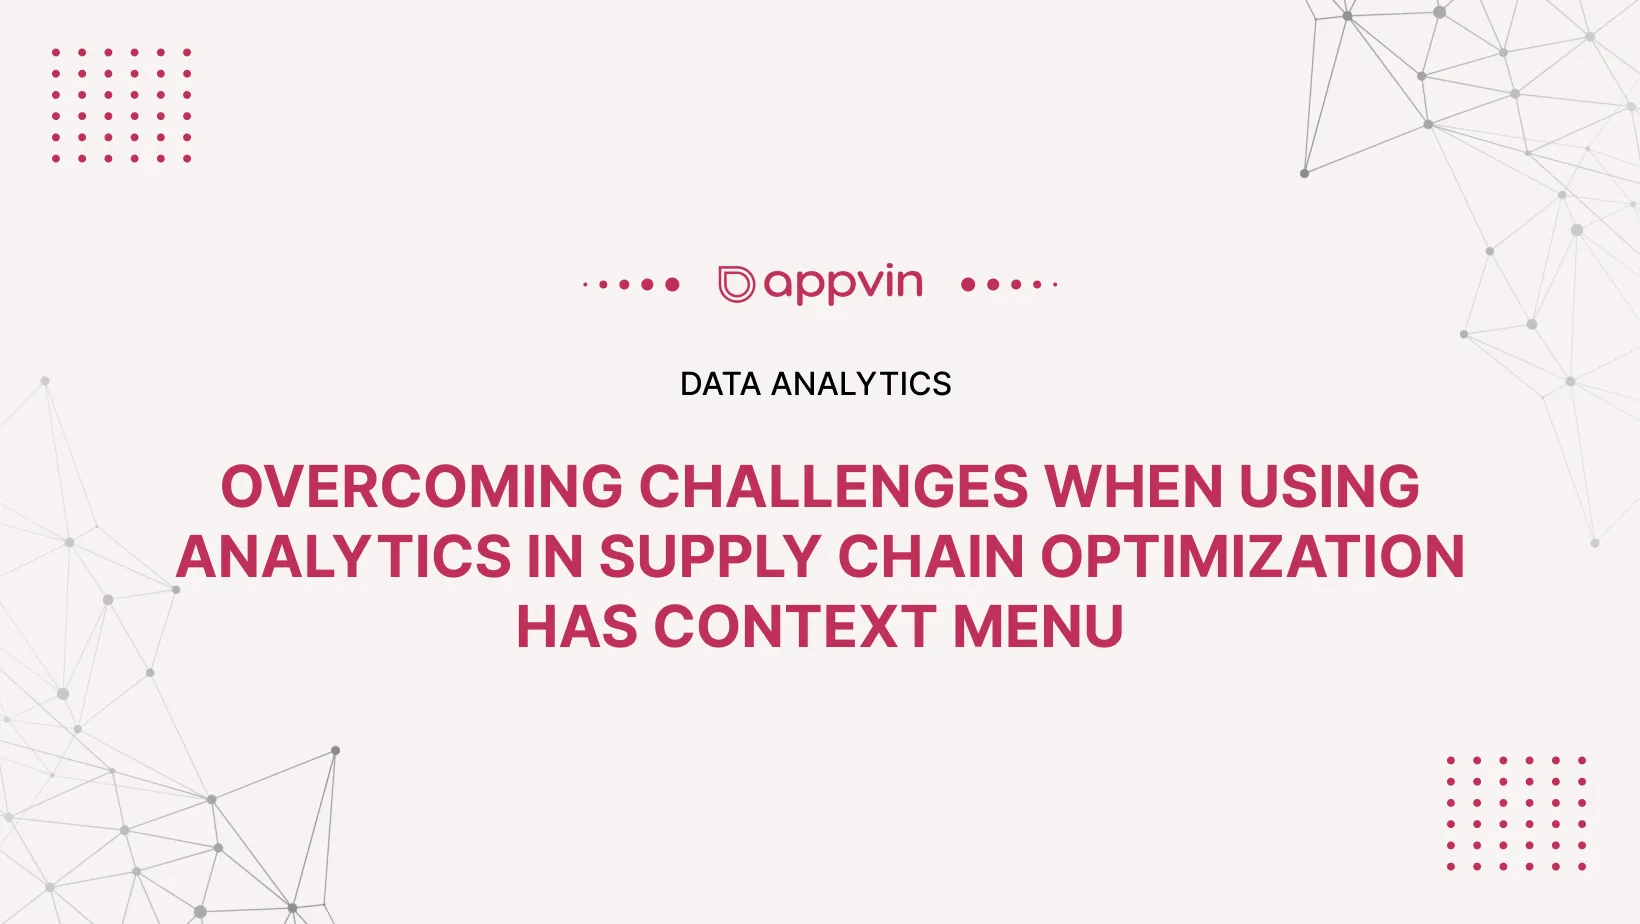 Overcoming challenges when using analytics in supply chain optimization has context menu